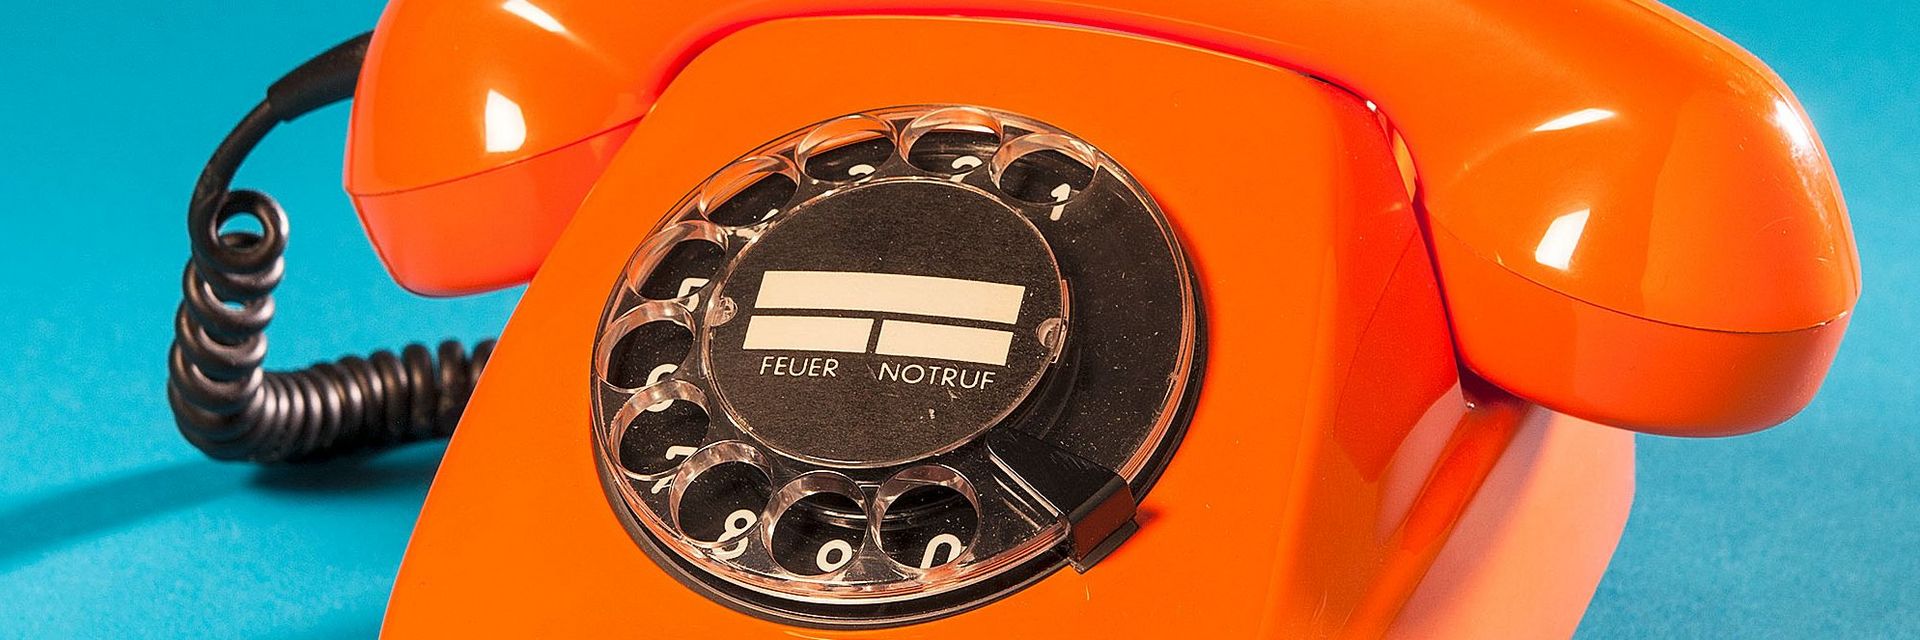 An orange corded telephone with a black rotary dial.